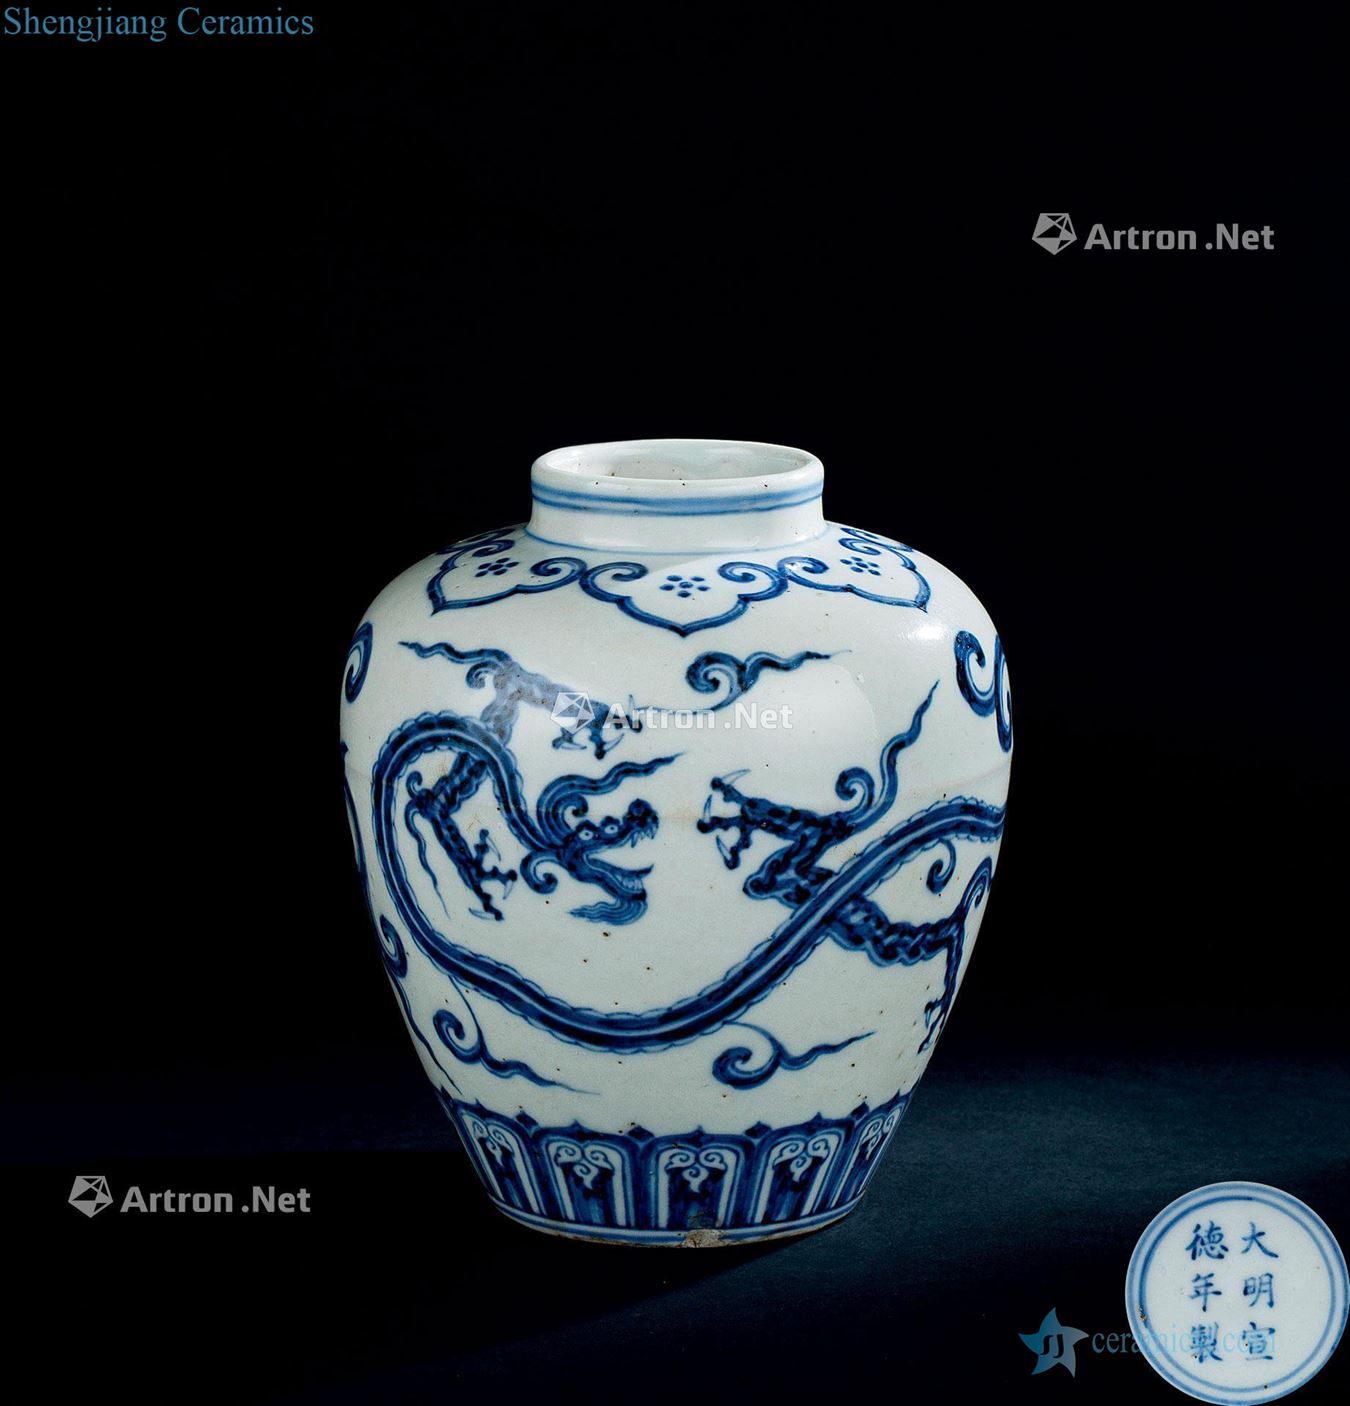 In the Ming dynasty (1368-1644) blue and white dragon tank